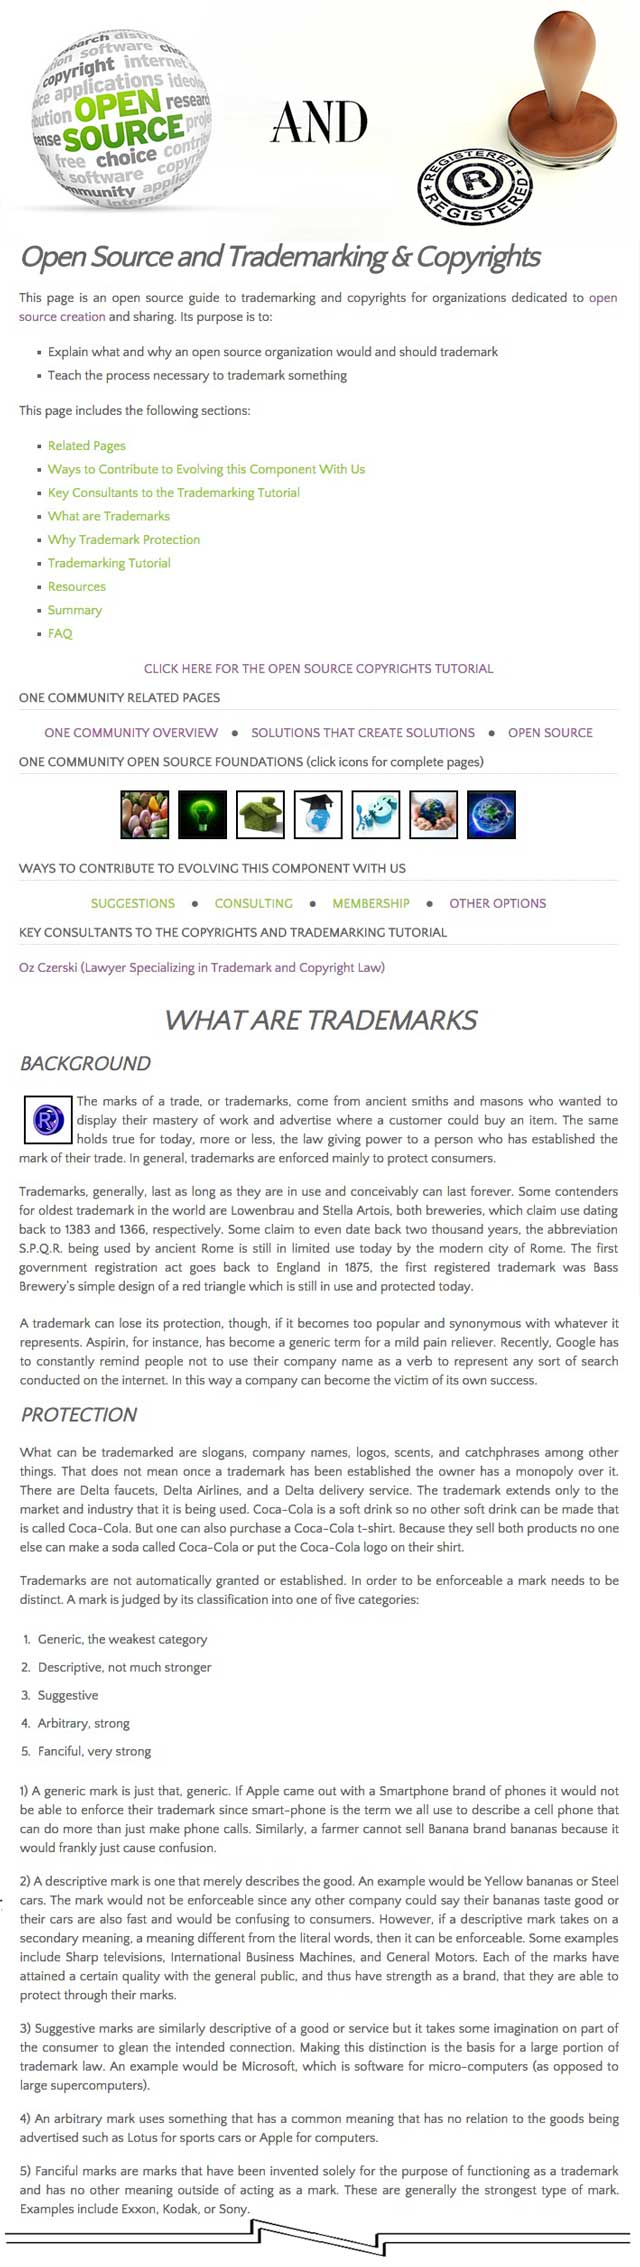 This last week the core team continued editing and formatting the wonderful work of Oz Czerski (Lawyer Specializing in Trademark and Copyright Law). This included a final round of followup edits to the Open Source and Copyrights tutorial setting up the initial layout details and imagery for the Open Source Trademarking tutorial page